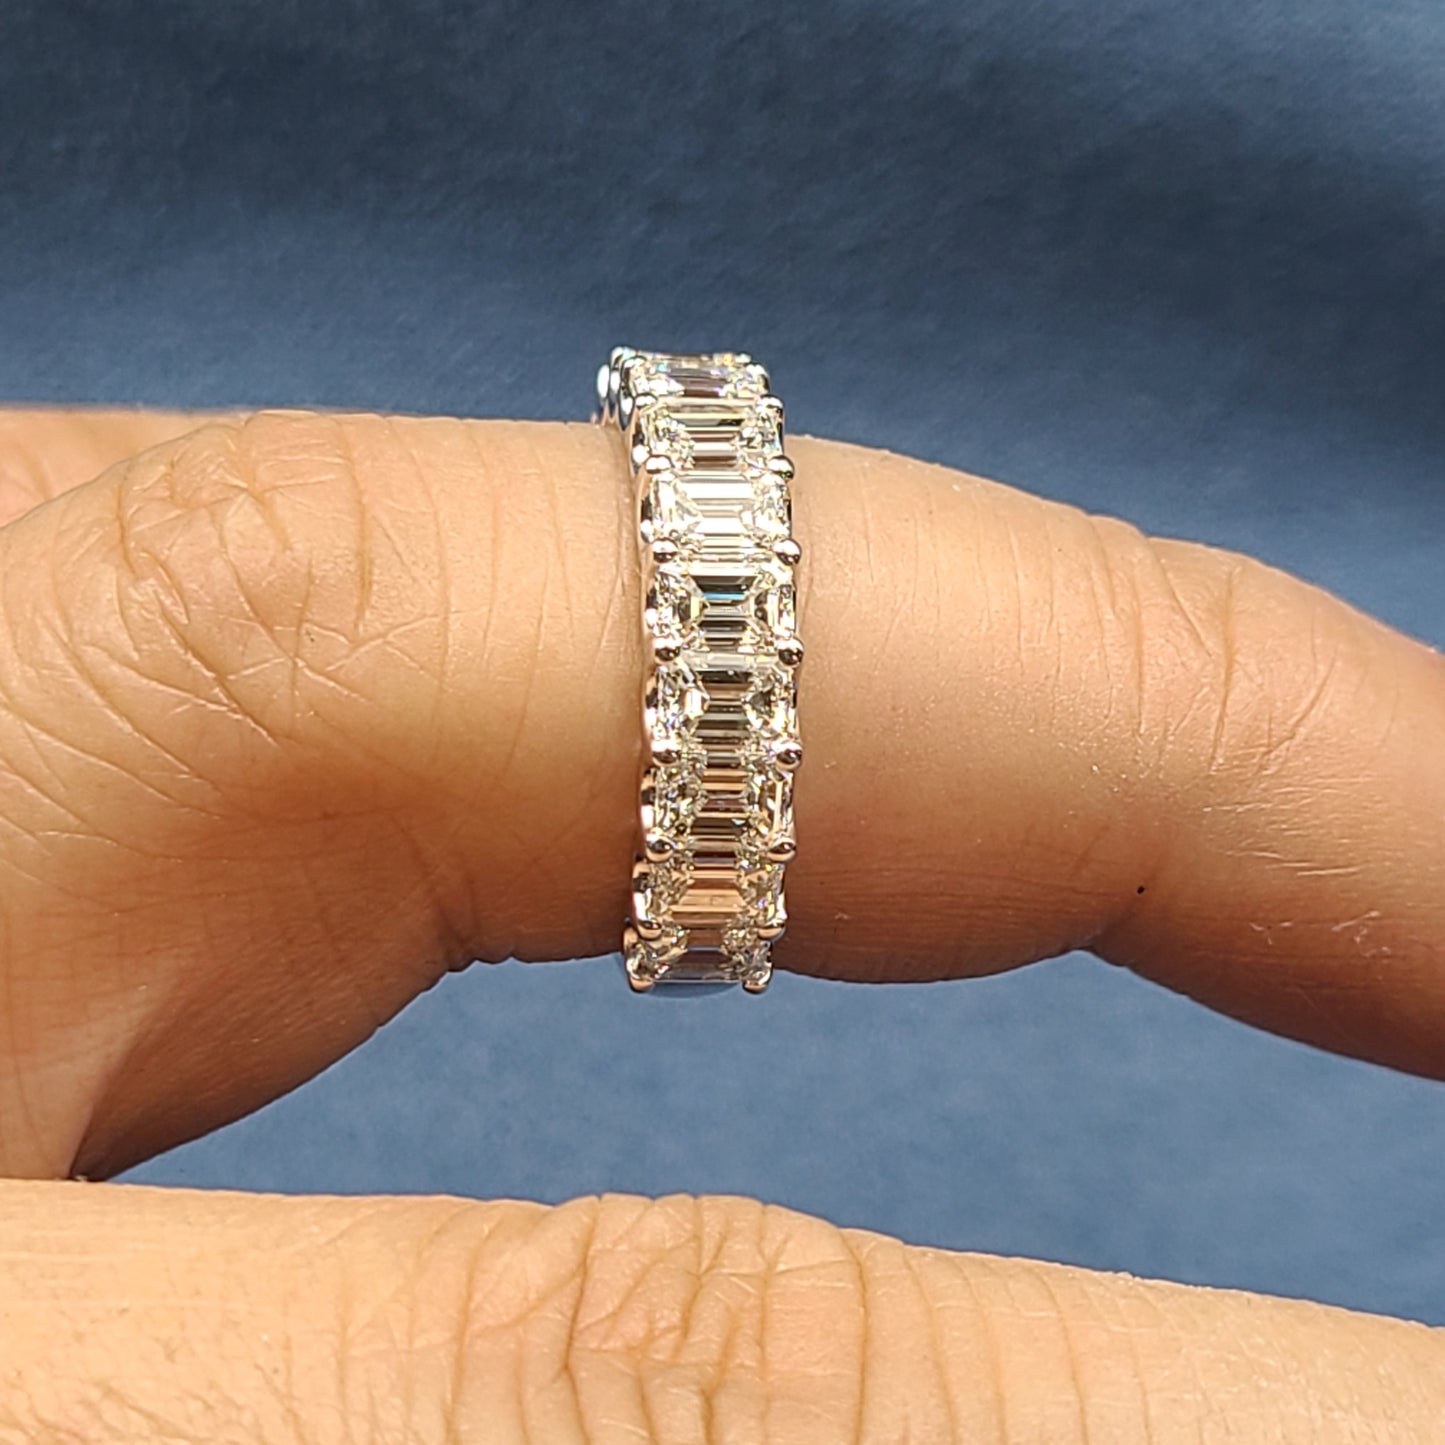 4.5ct Emerald Cut 17stones Diamond Band/Eternity Wedding Ring/Stackable Diamond Band/Anniversary gift Ring/Width 5.2mm/gifts for her